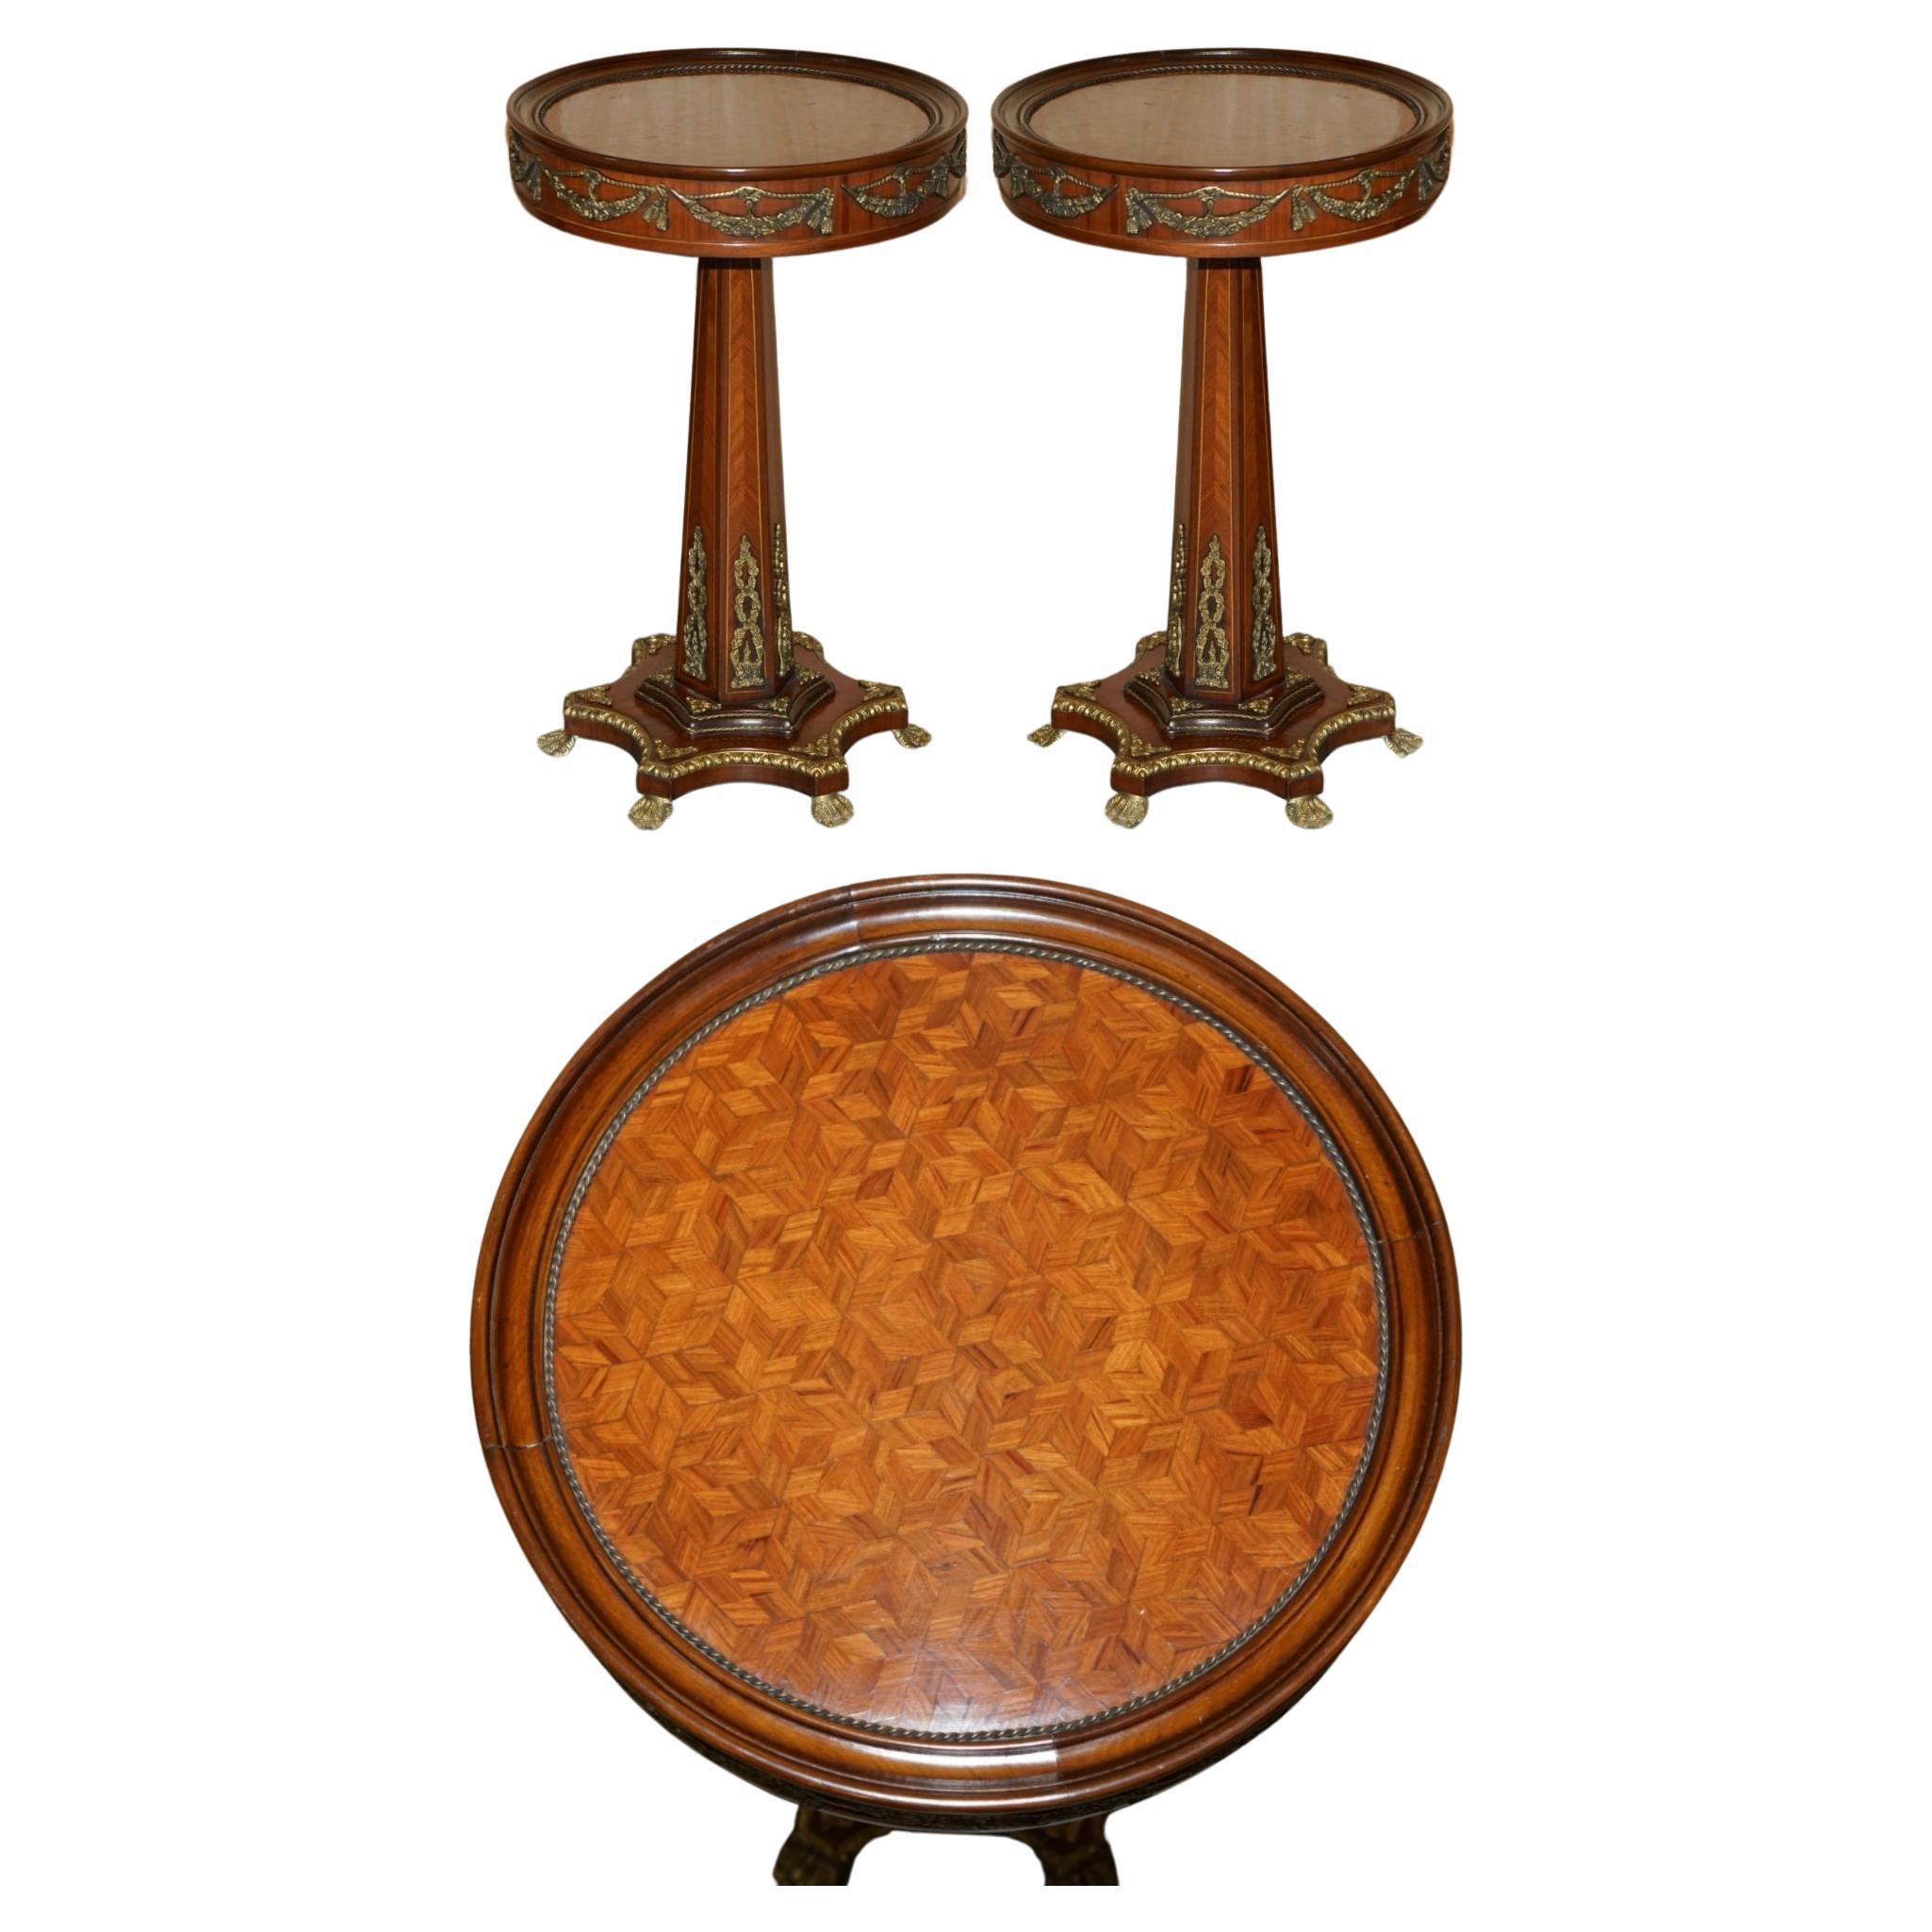 LOVELY PAiR OF FRENCH PARQUEtry WALNUT & GILT BRASS ROUND OCCASIONAL TABLES im Angebot